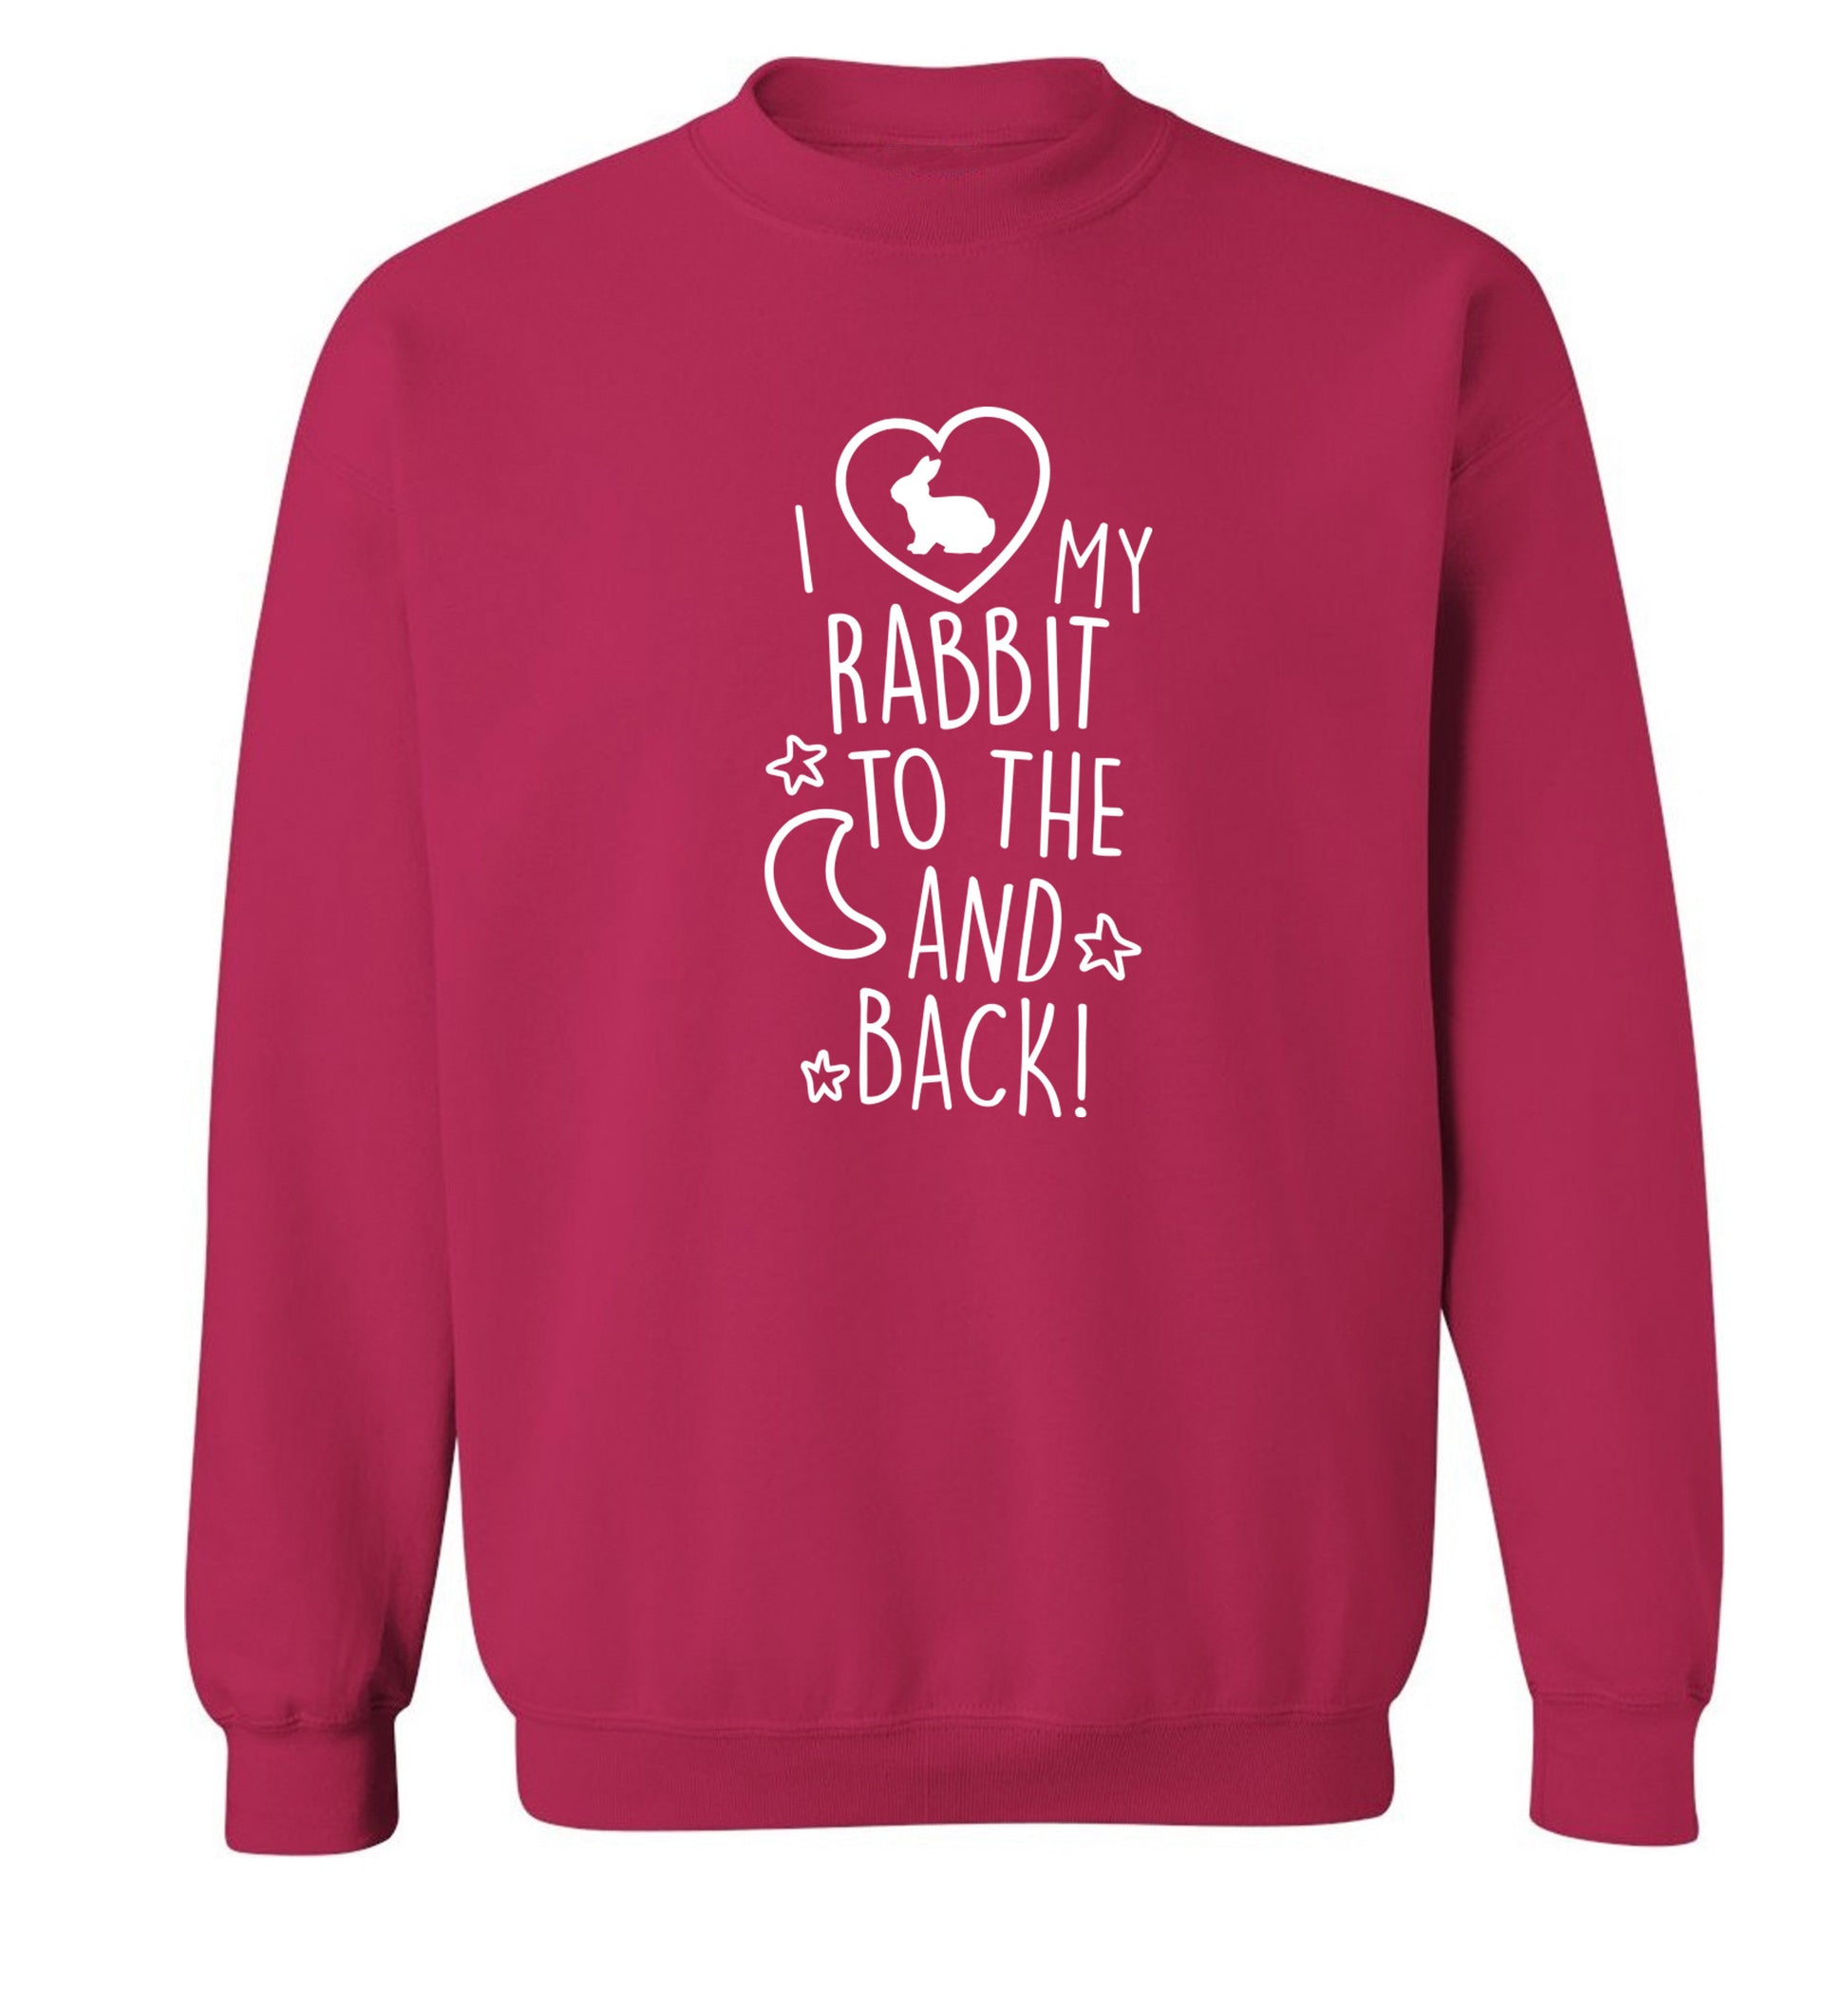 I love my rabbit to the moon and back Adult's unisex pink  sweater XL